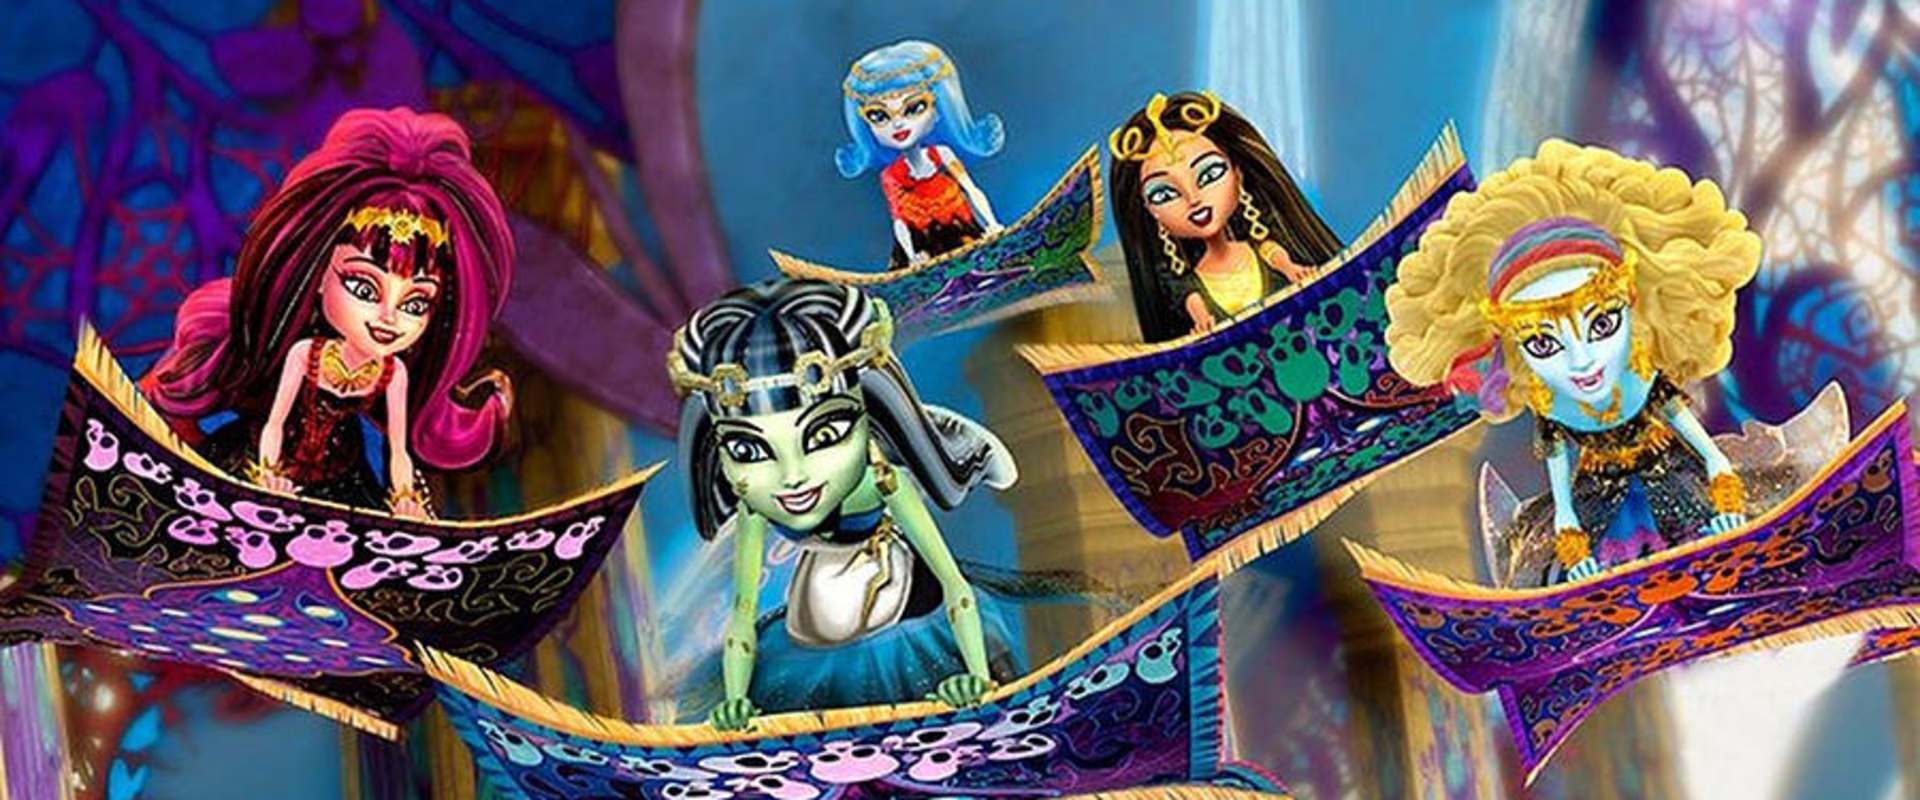 Monster High: 13 Wishes background 2